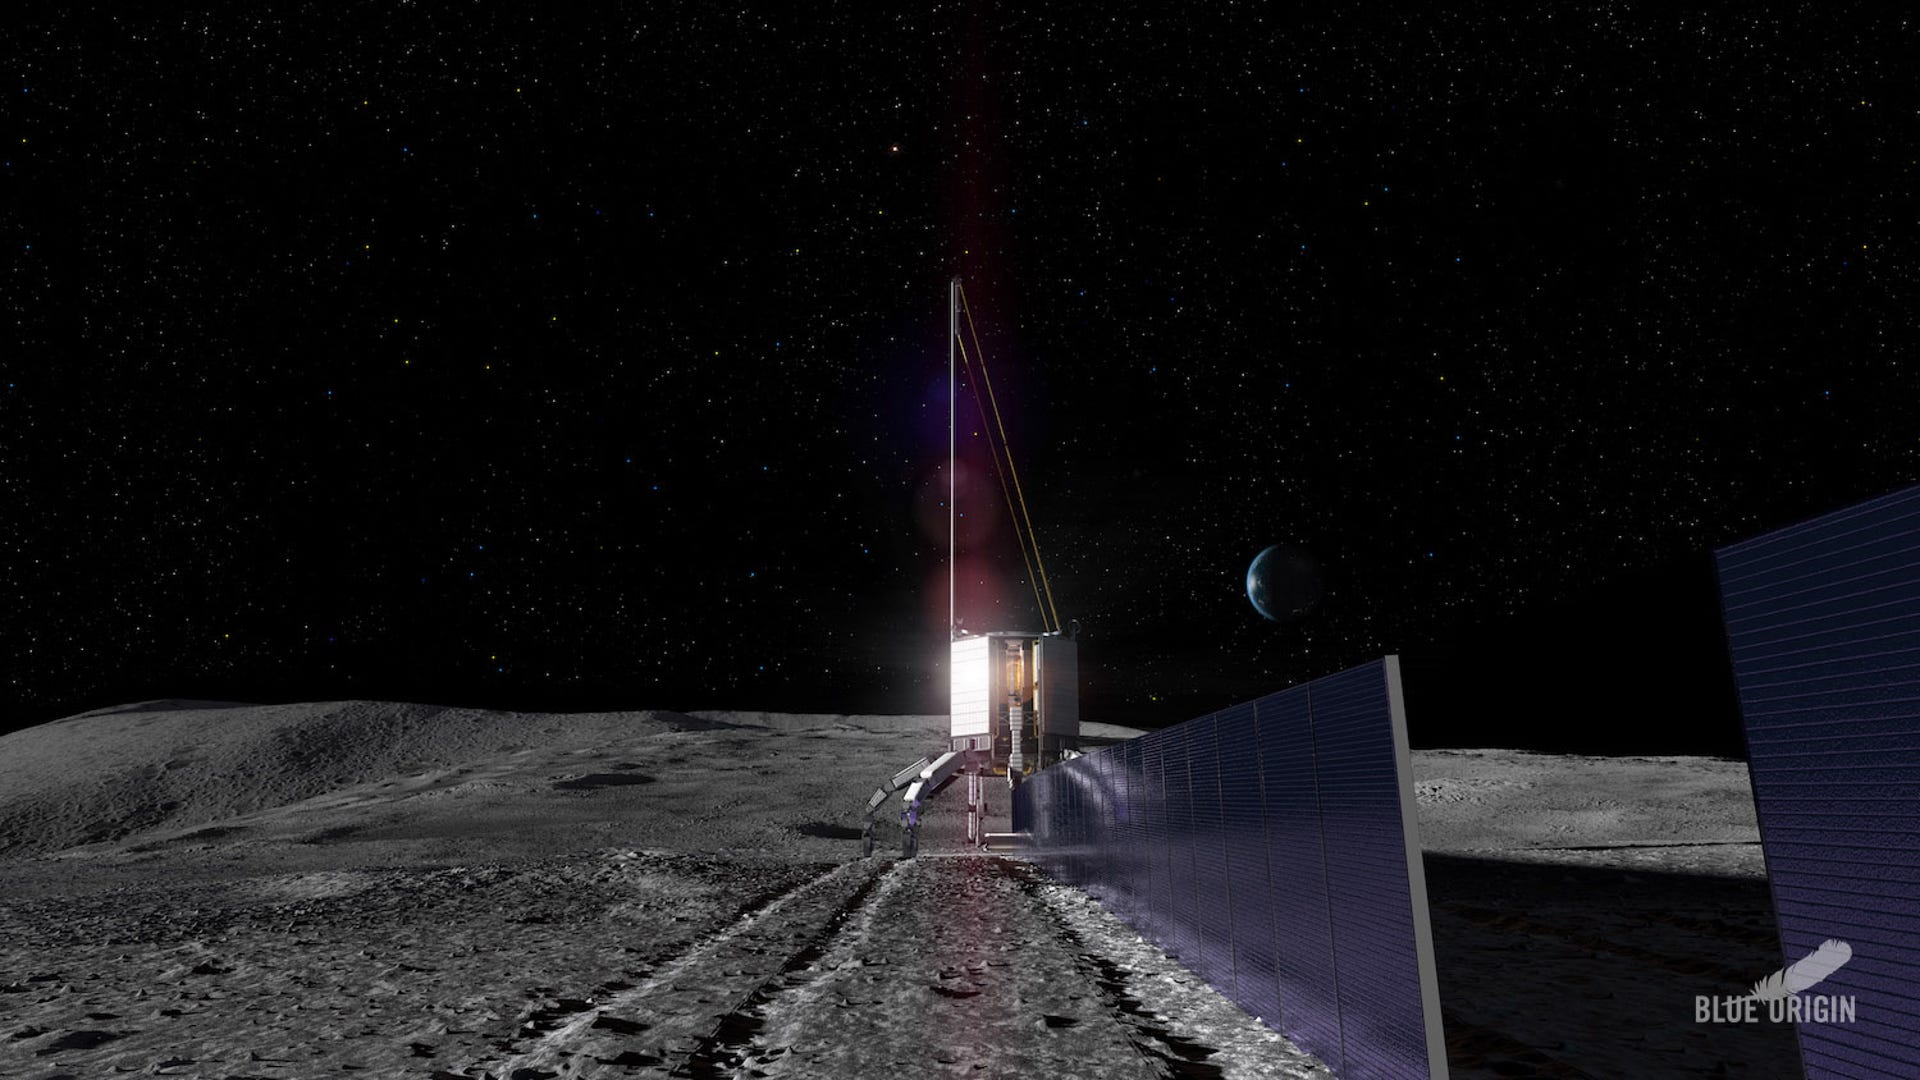 Blue Origin concept illustration shows its Blue Alchemist solar project on the moon. Art shows the moon surface in gray with a metal object on legs creating a solar panel.